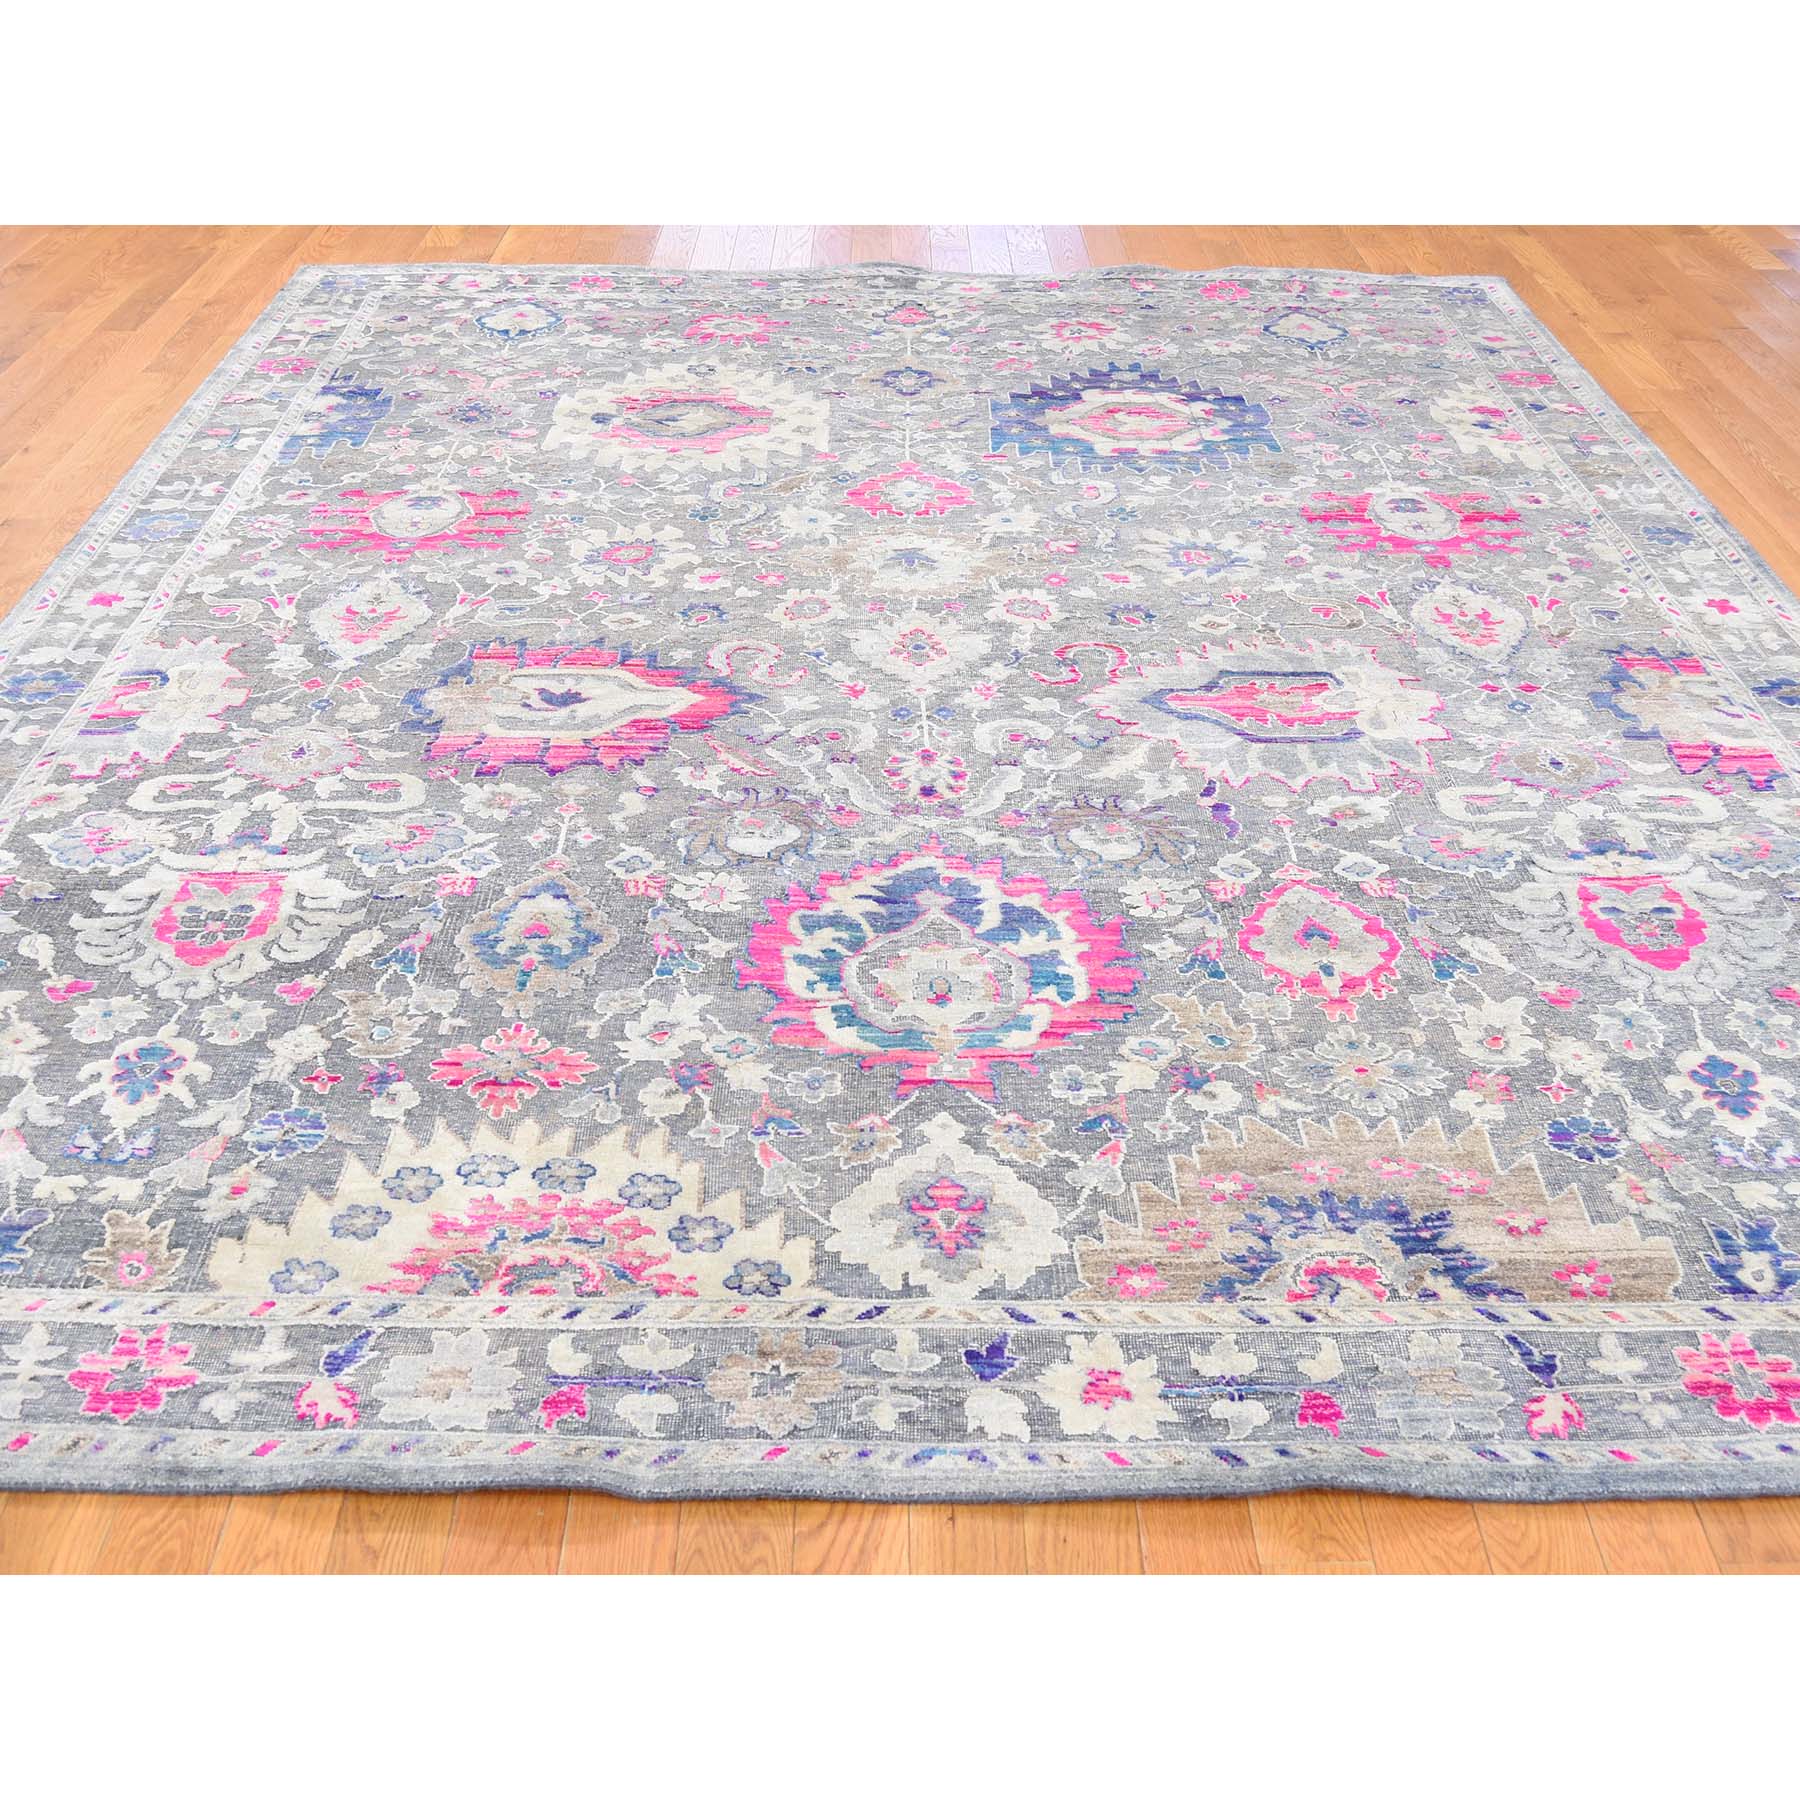 8-1 x10-2 Sari Silk With Textured Wool Hand Knotted Oushak Influence Rug 